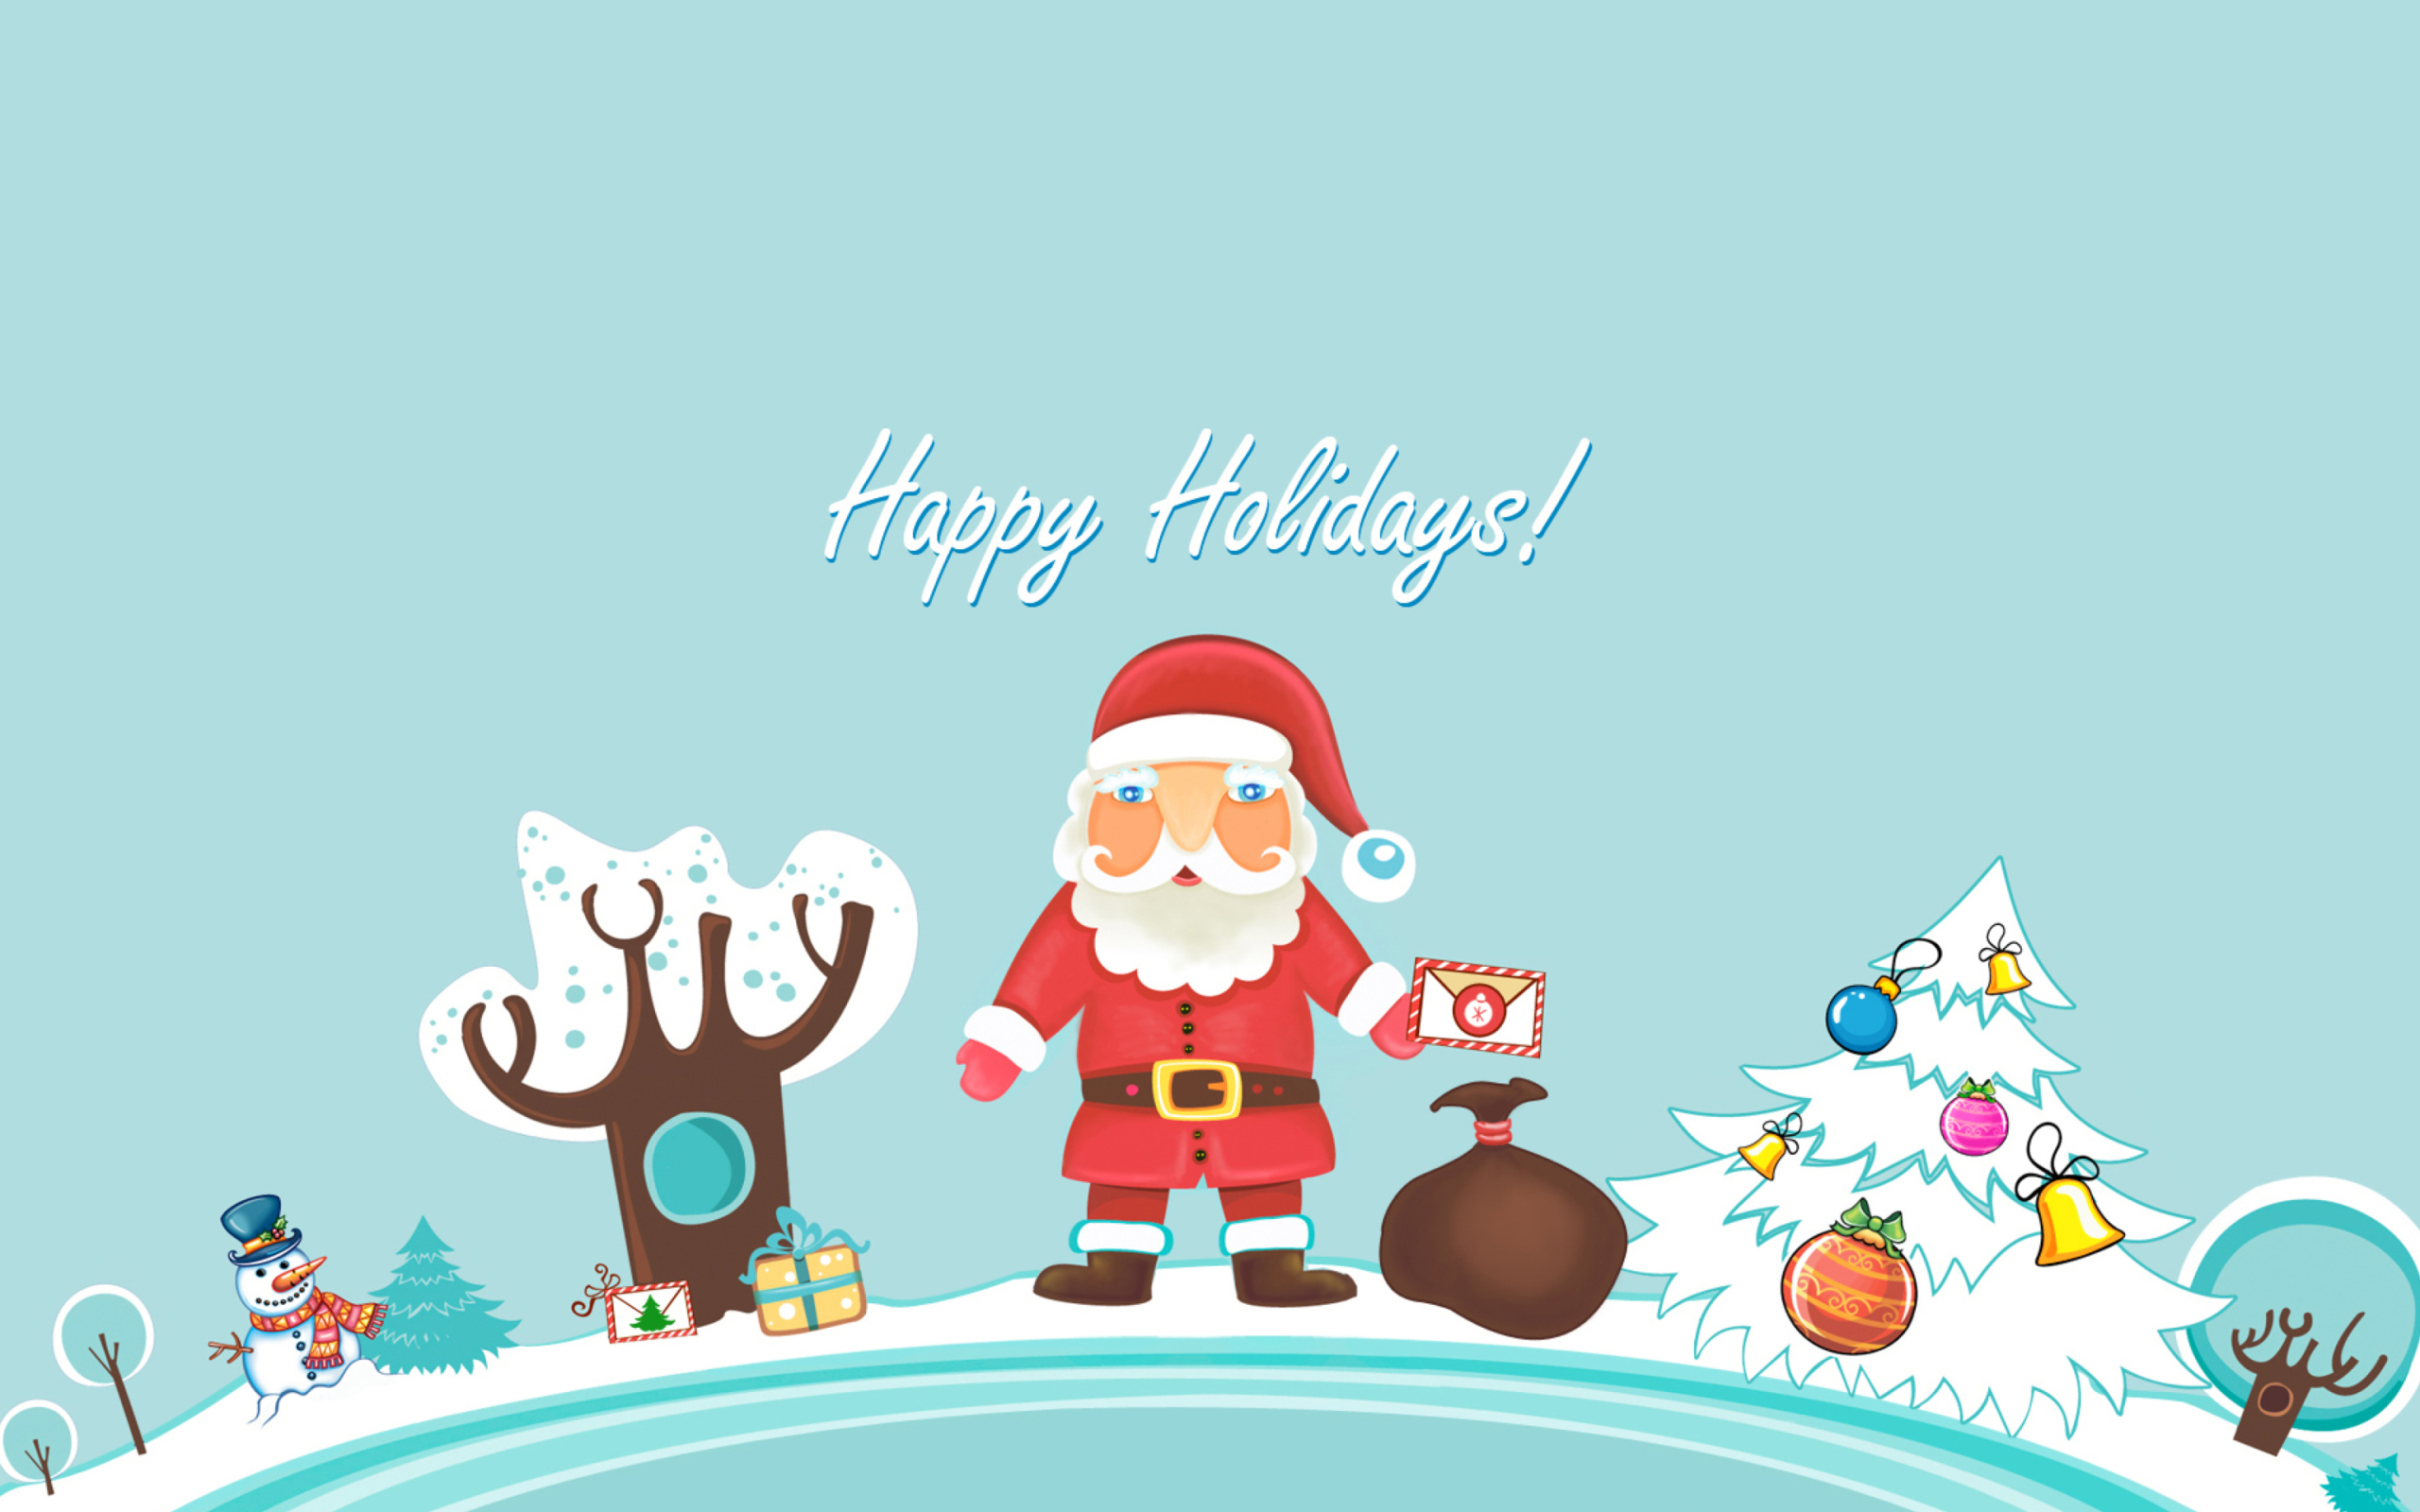 Santa Claus Wishes You Happy Holidays wallpaper 2560x1600